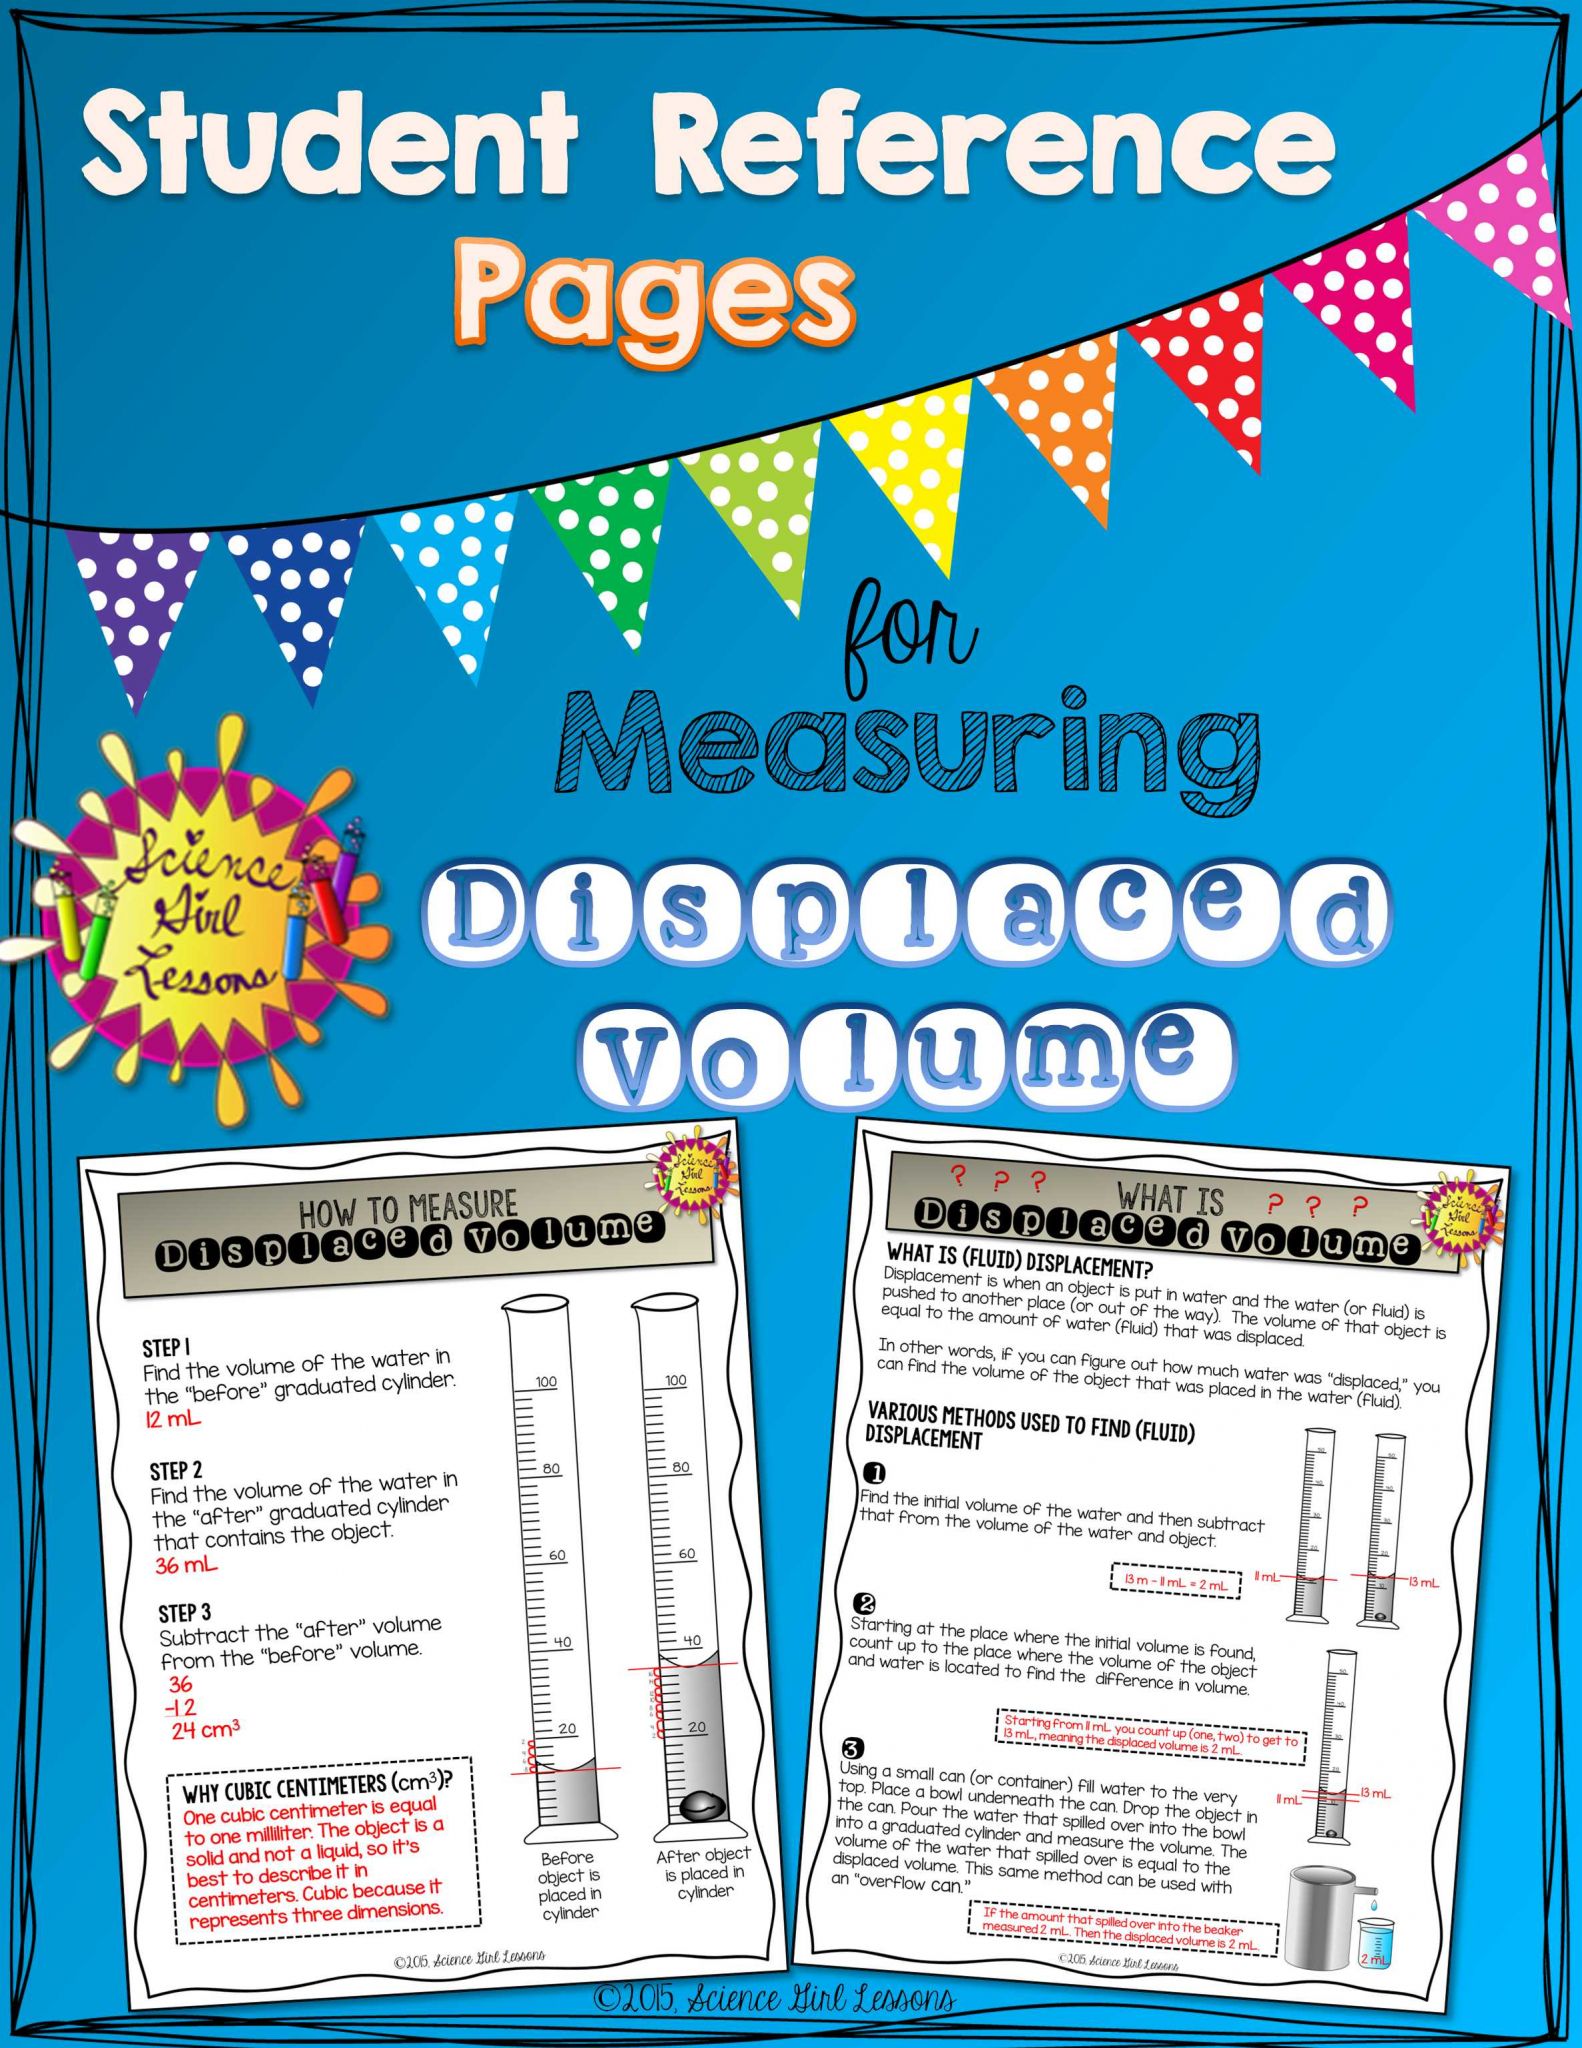 Measuring Liquid Volume Worksheet and This Free Reference Was Designed to Help Students Learn the Steps to